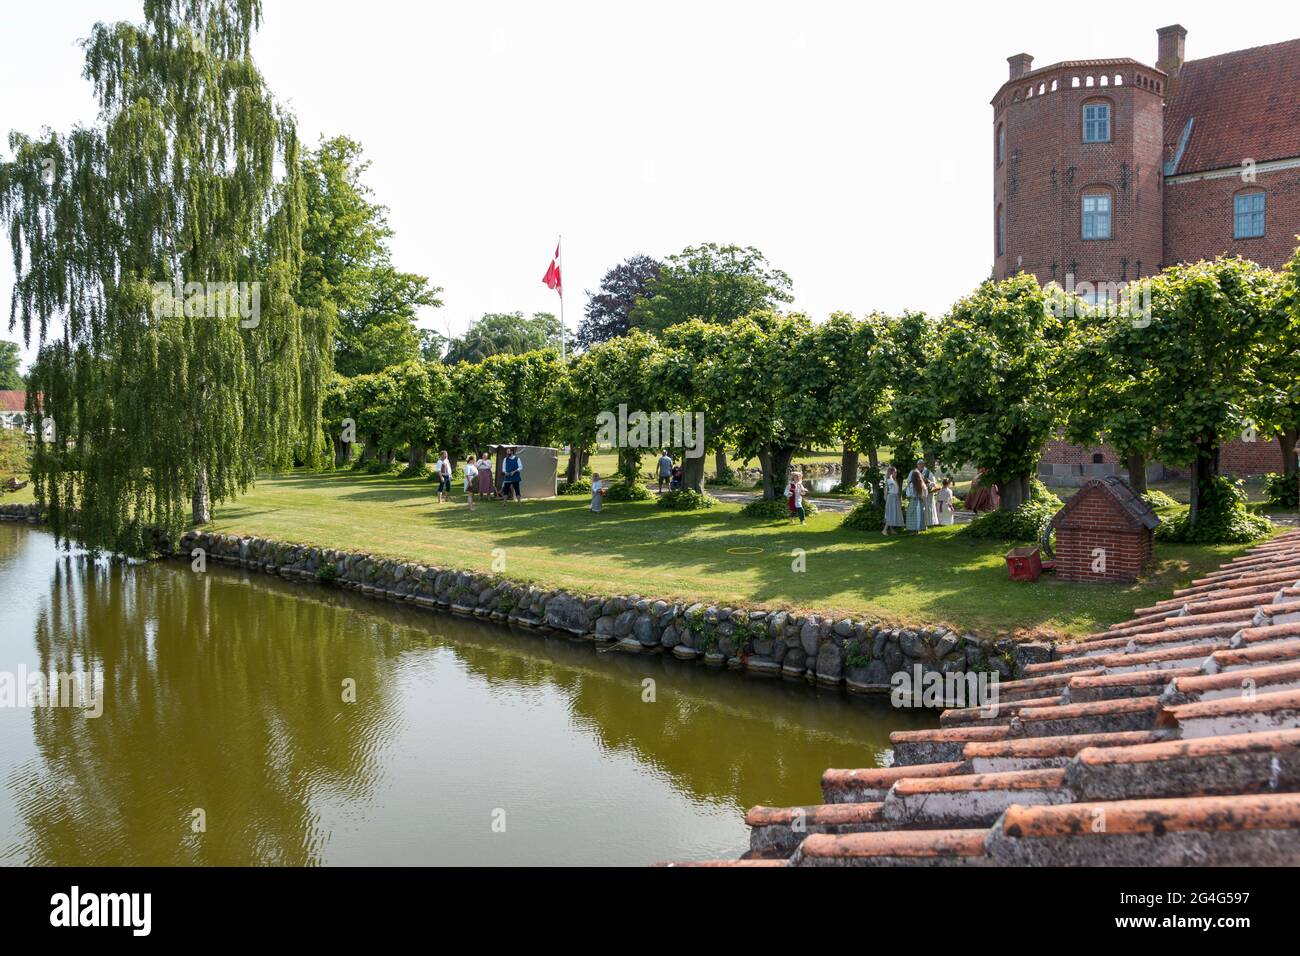 Auning, - 19 June 2021: Gammel Estrup Castle from the 14th century, The castle is surrounded by nature, trees and lakes and moat Stock Photo - Alamy